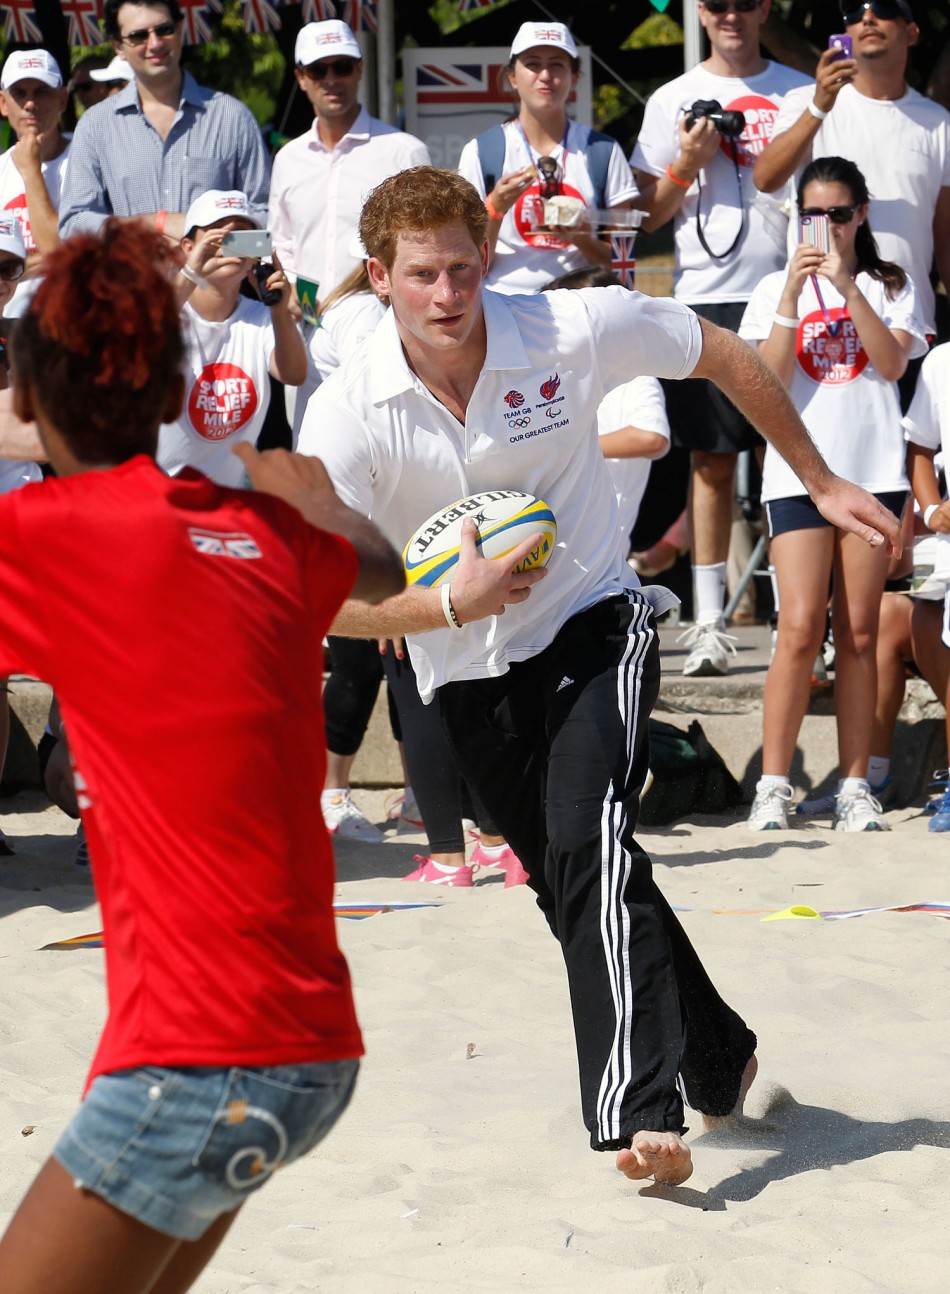 Prince Harry Charms Brazil with His Sports Skills and Energetic Style